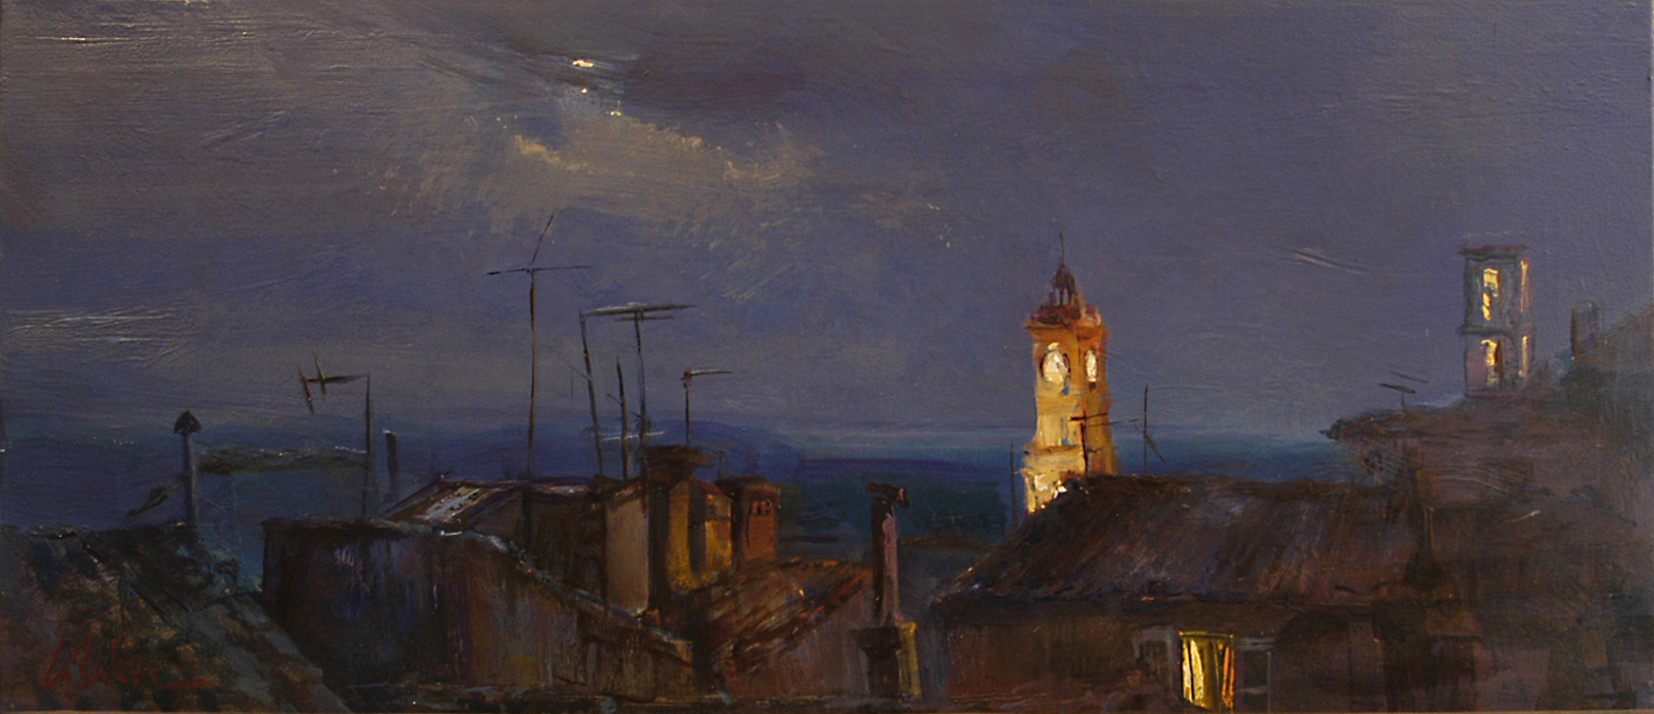 Light Sources, Grasse by Night - oil on canvas - 33 x 80 cm - SOLD